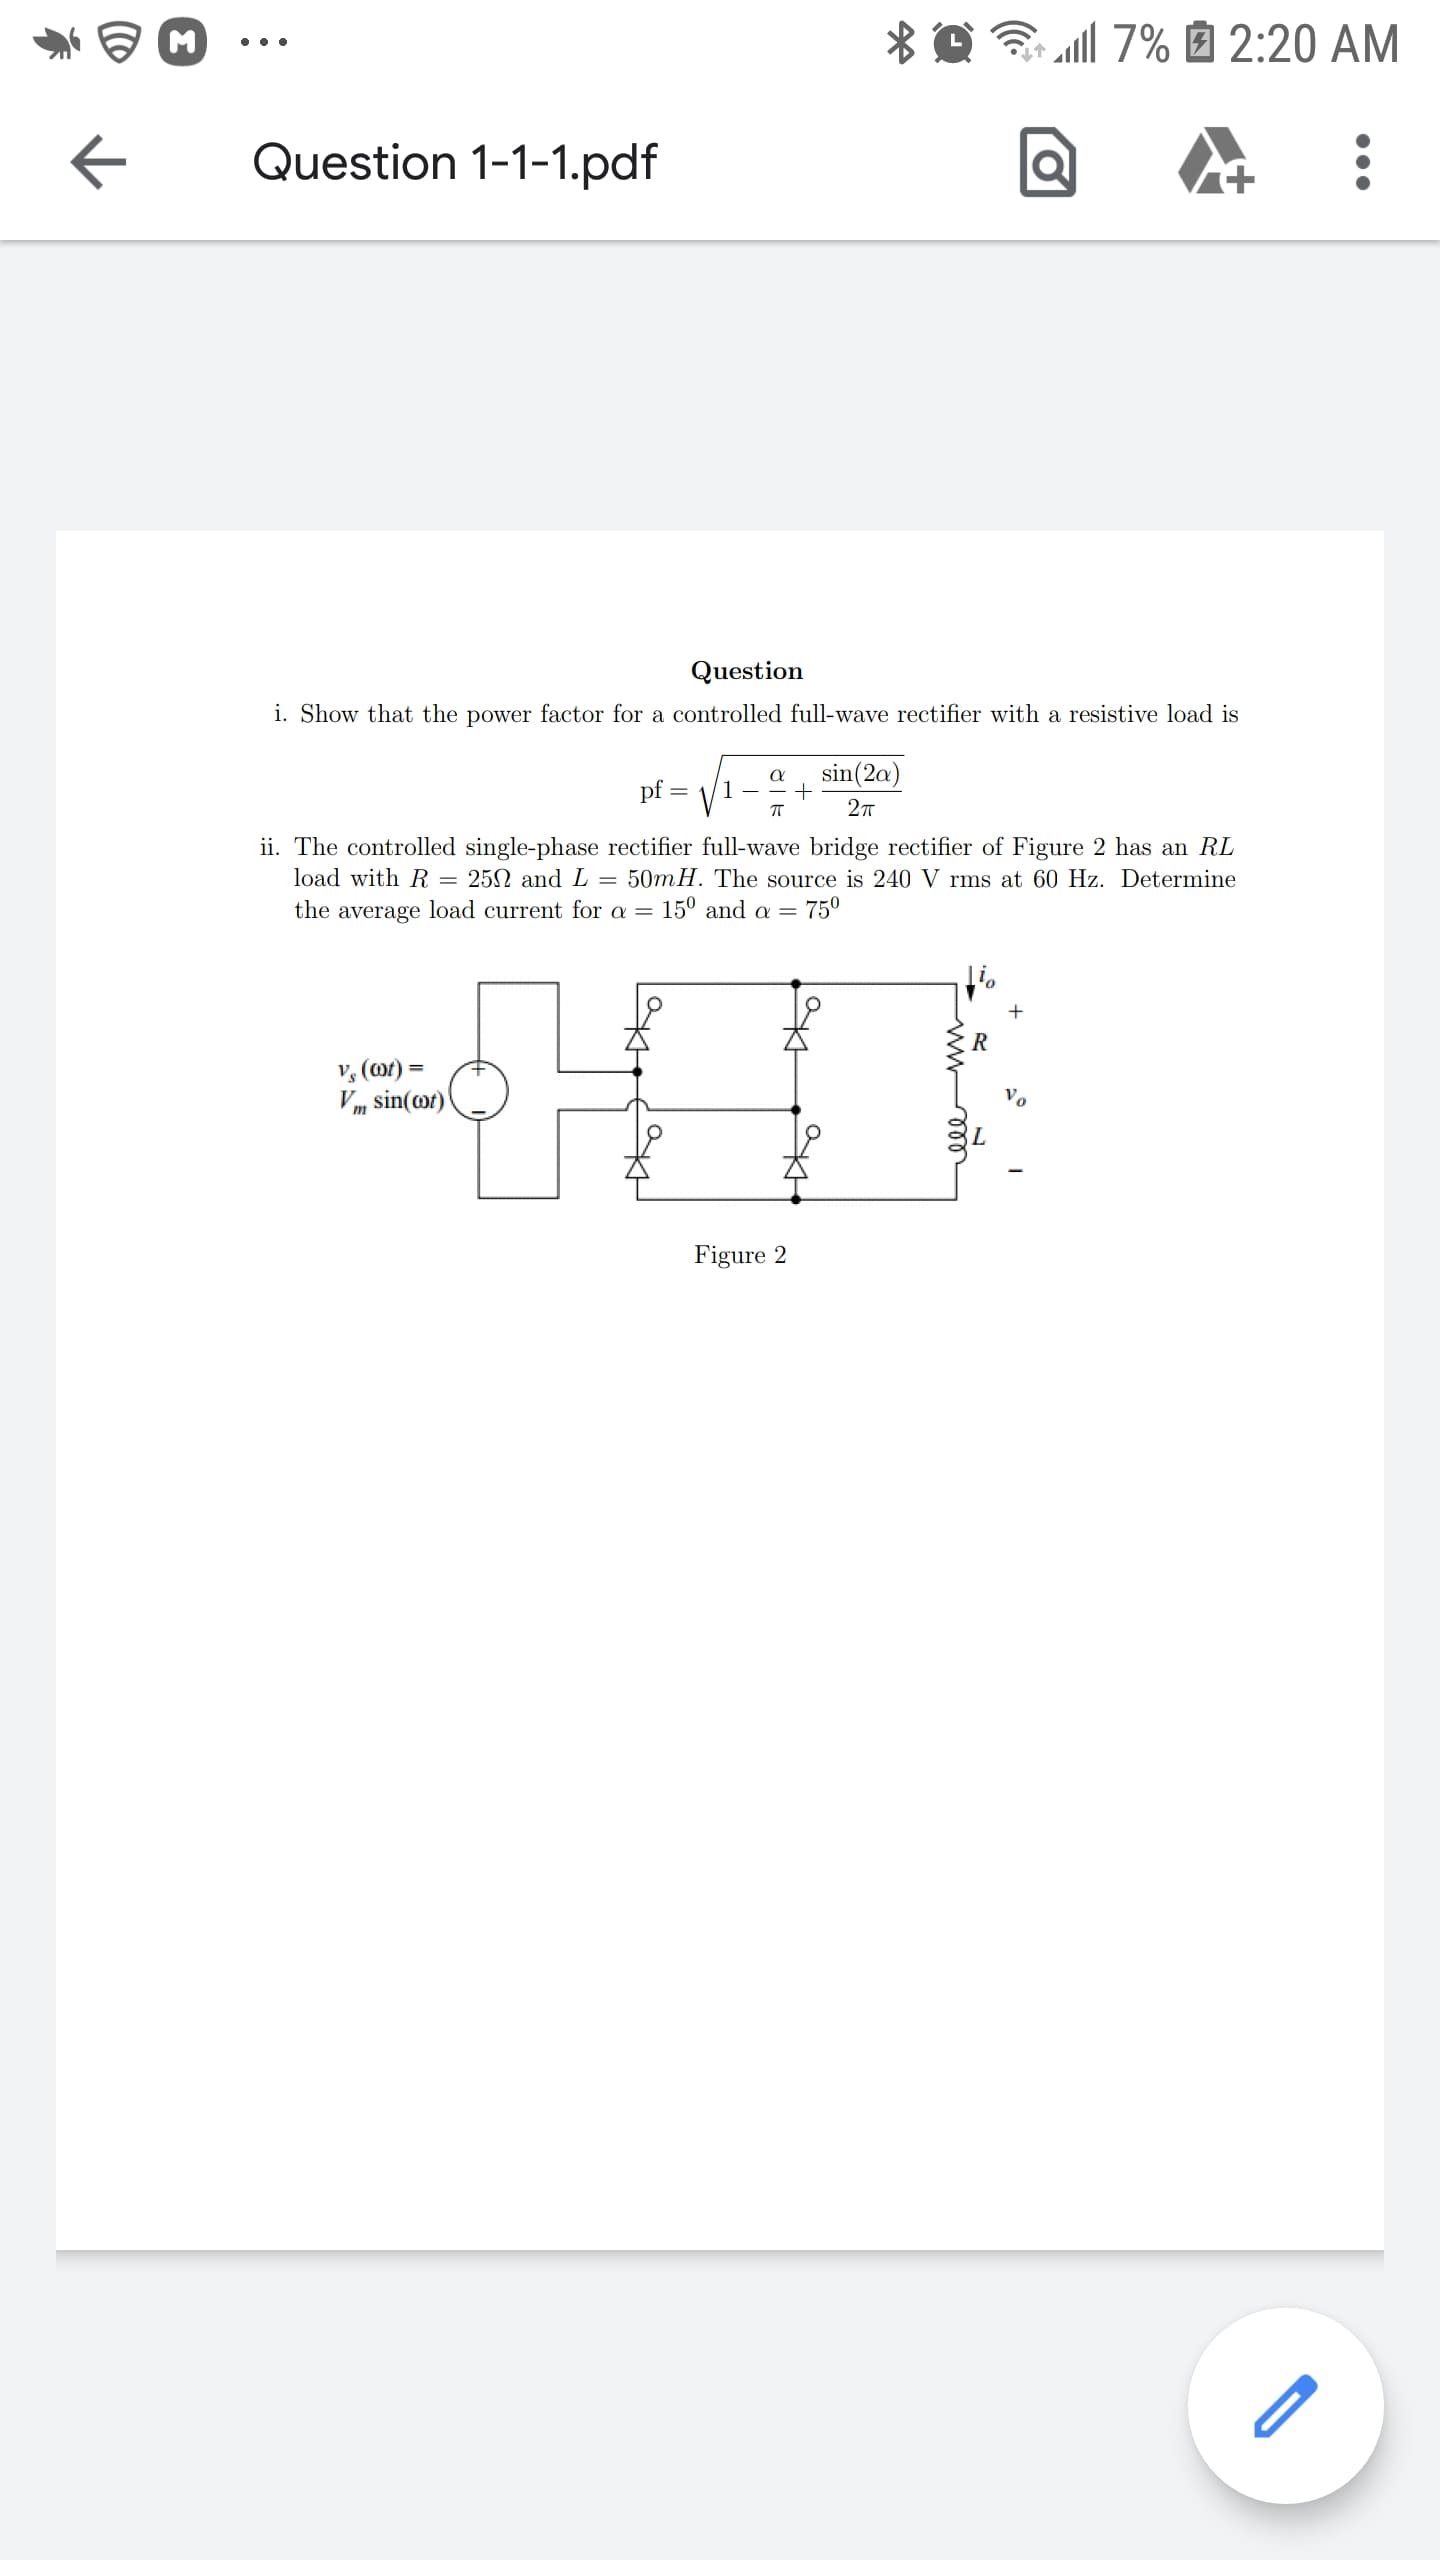 Question
i. Show that the power factor for a controlled full-wave rectifier with a resistive load is
sin(2a)
pf =
V1
27
